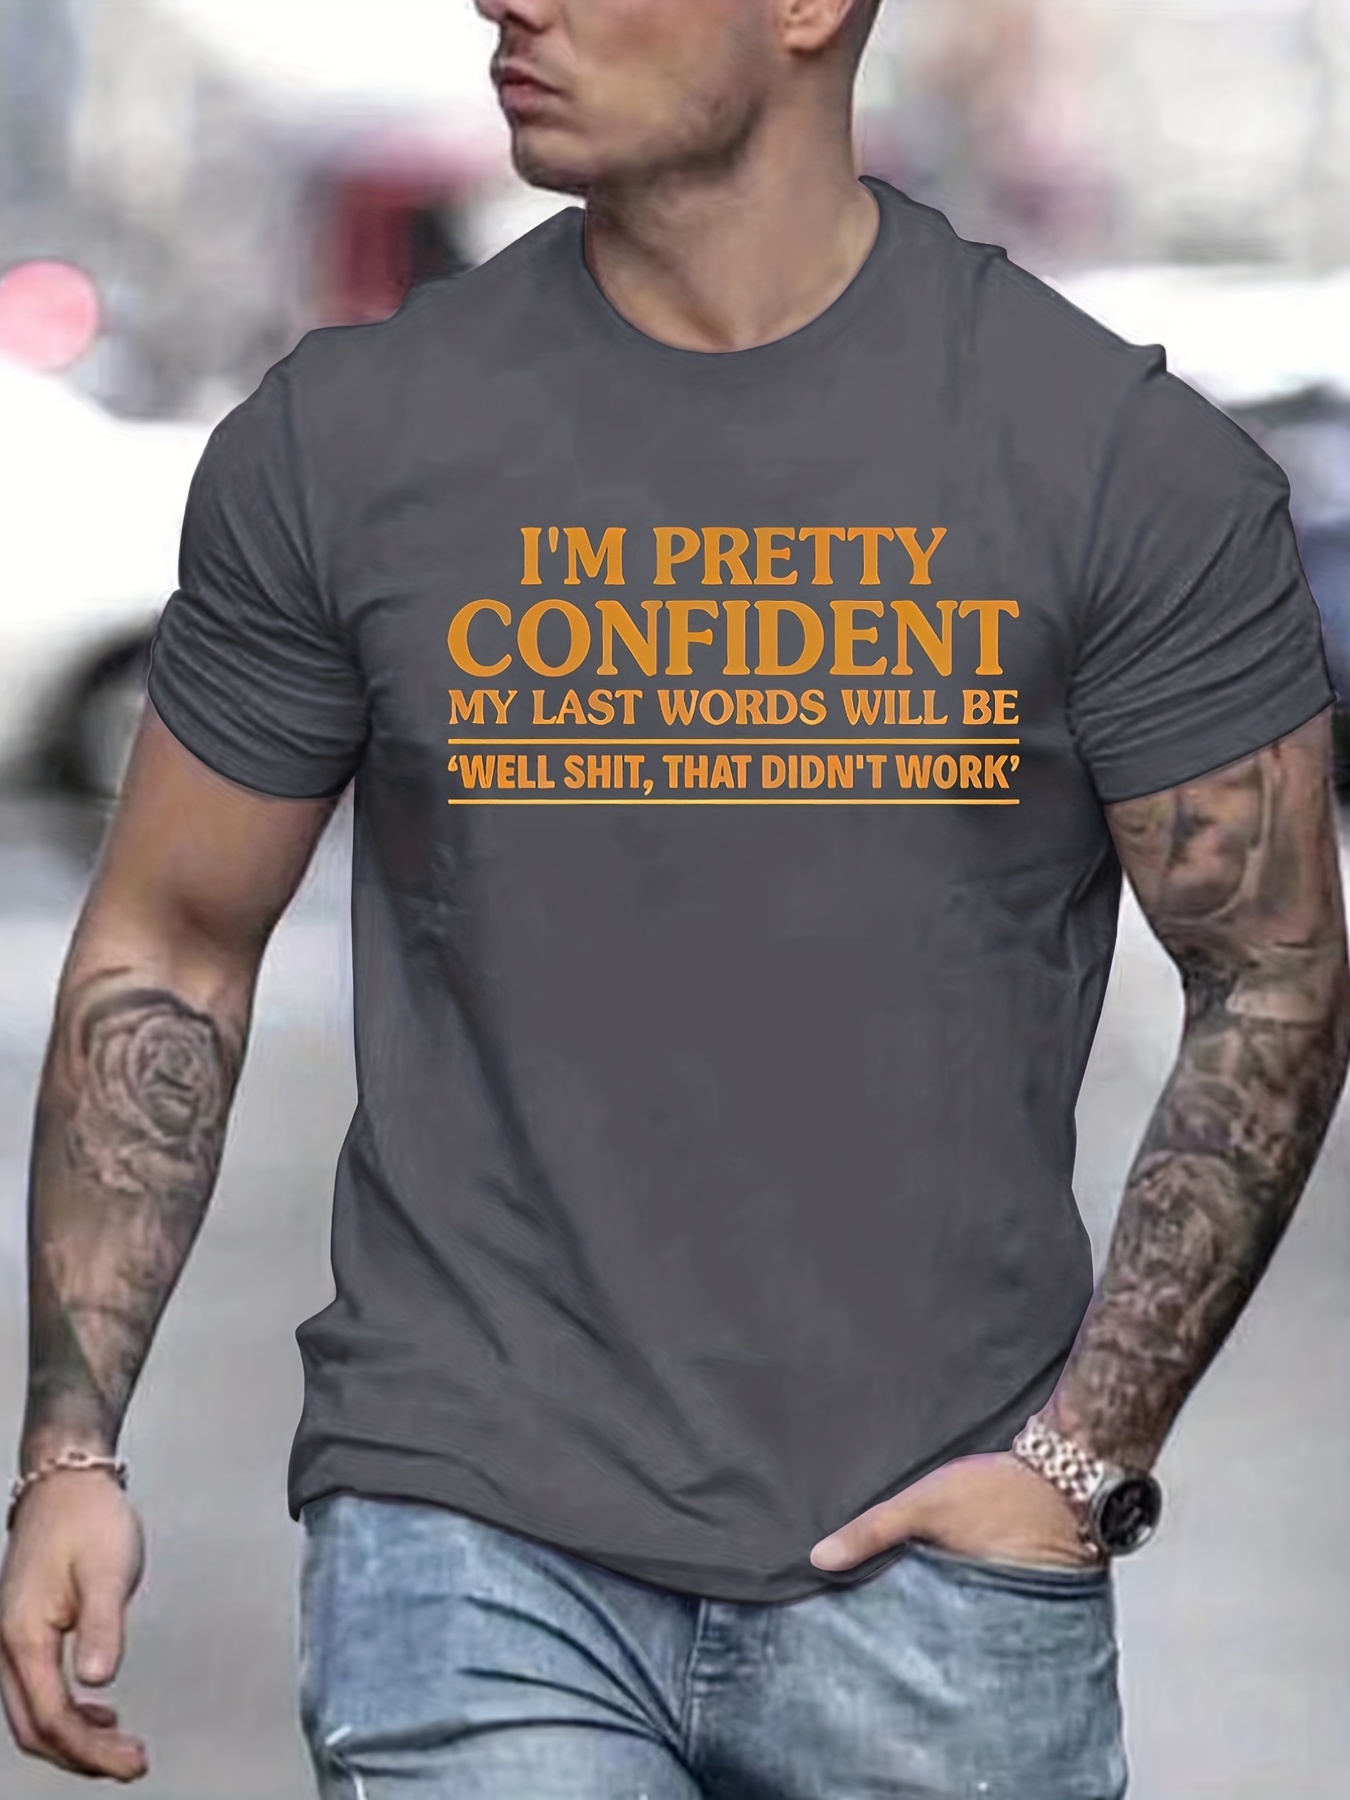 powerful slogan print mens graphic design crew neck t shirt casual comfy tees t shirts for summer mens clothing tops details 0